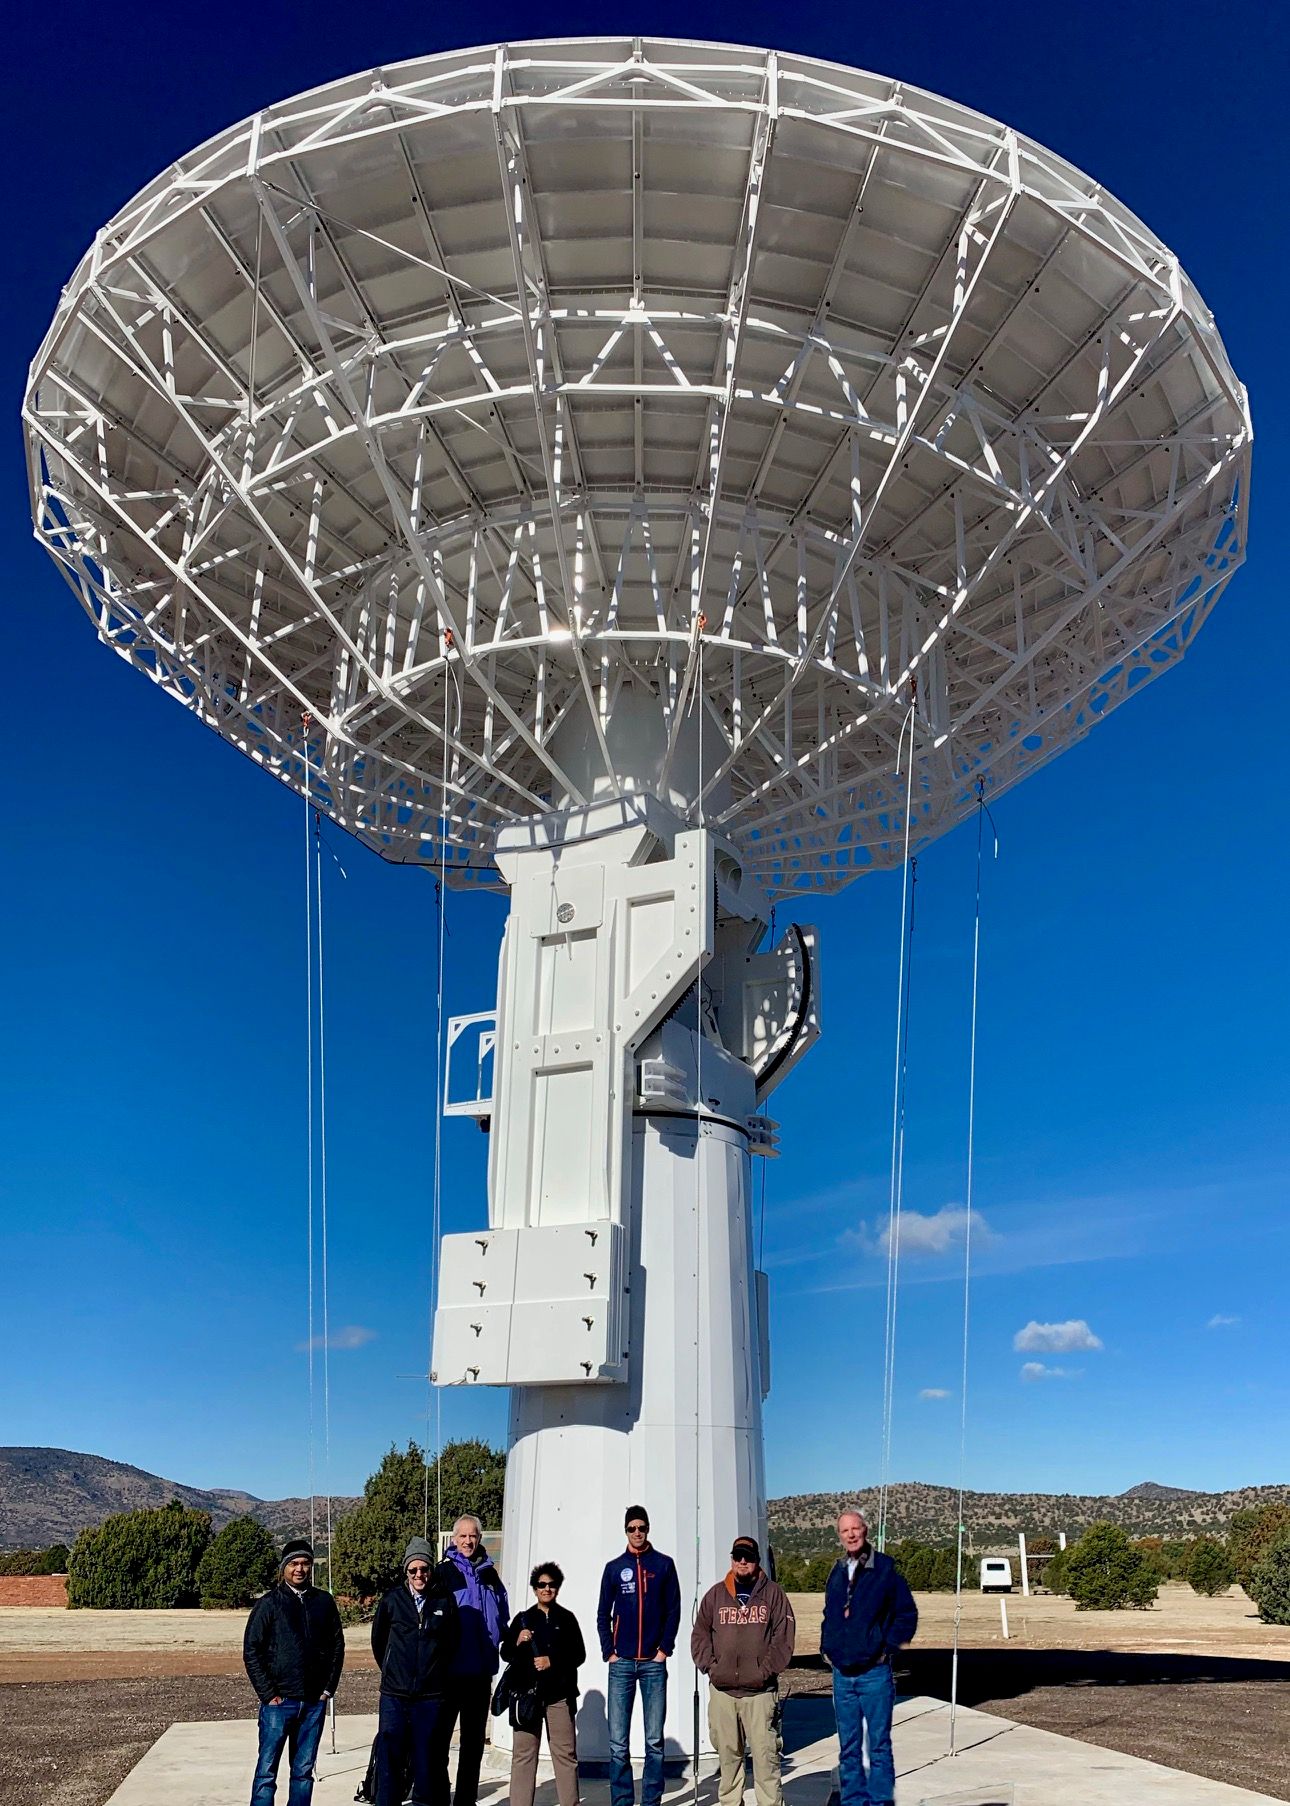 NASA and University of Texas Team at McDonald Geodetic Observatory in front of new NASA VGOS Antenna, March 3, 2019 (Photo, courtesy Univ. of Texas)